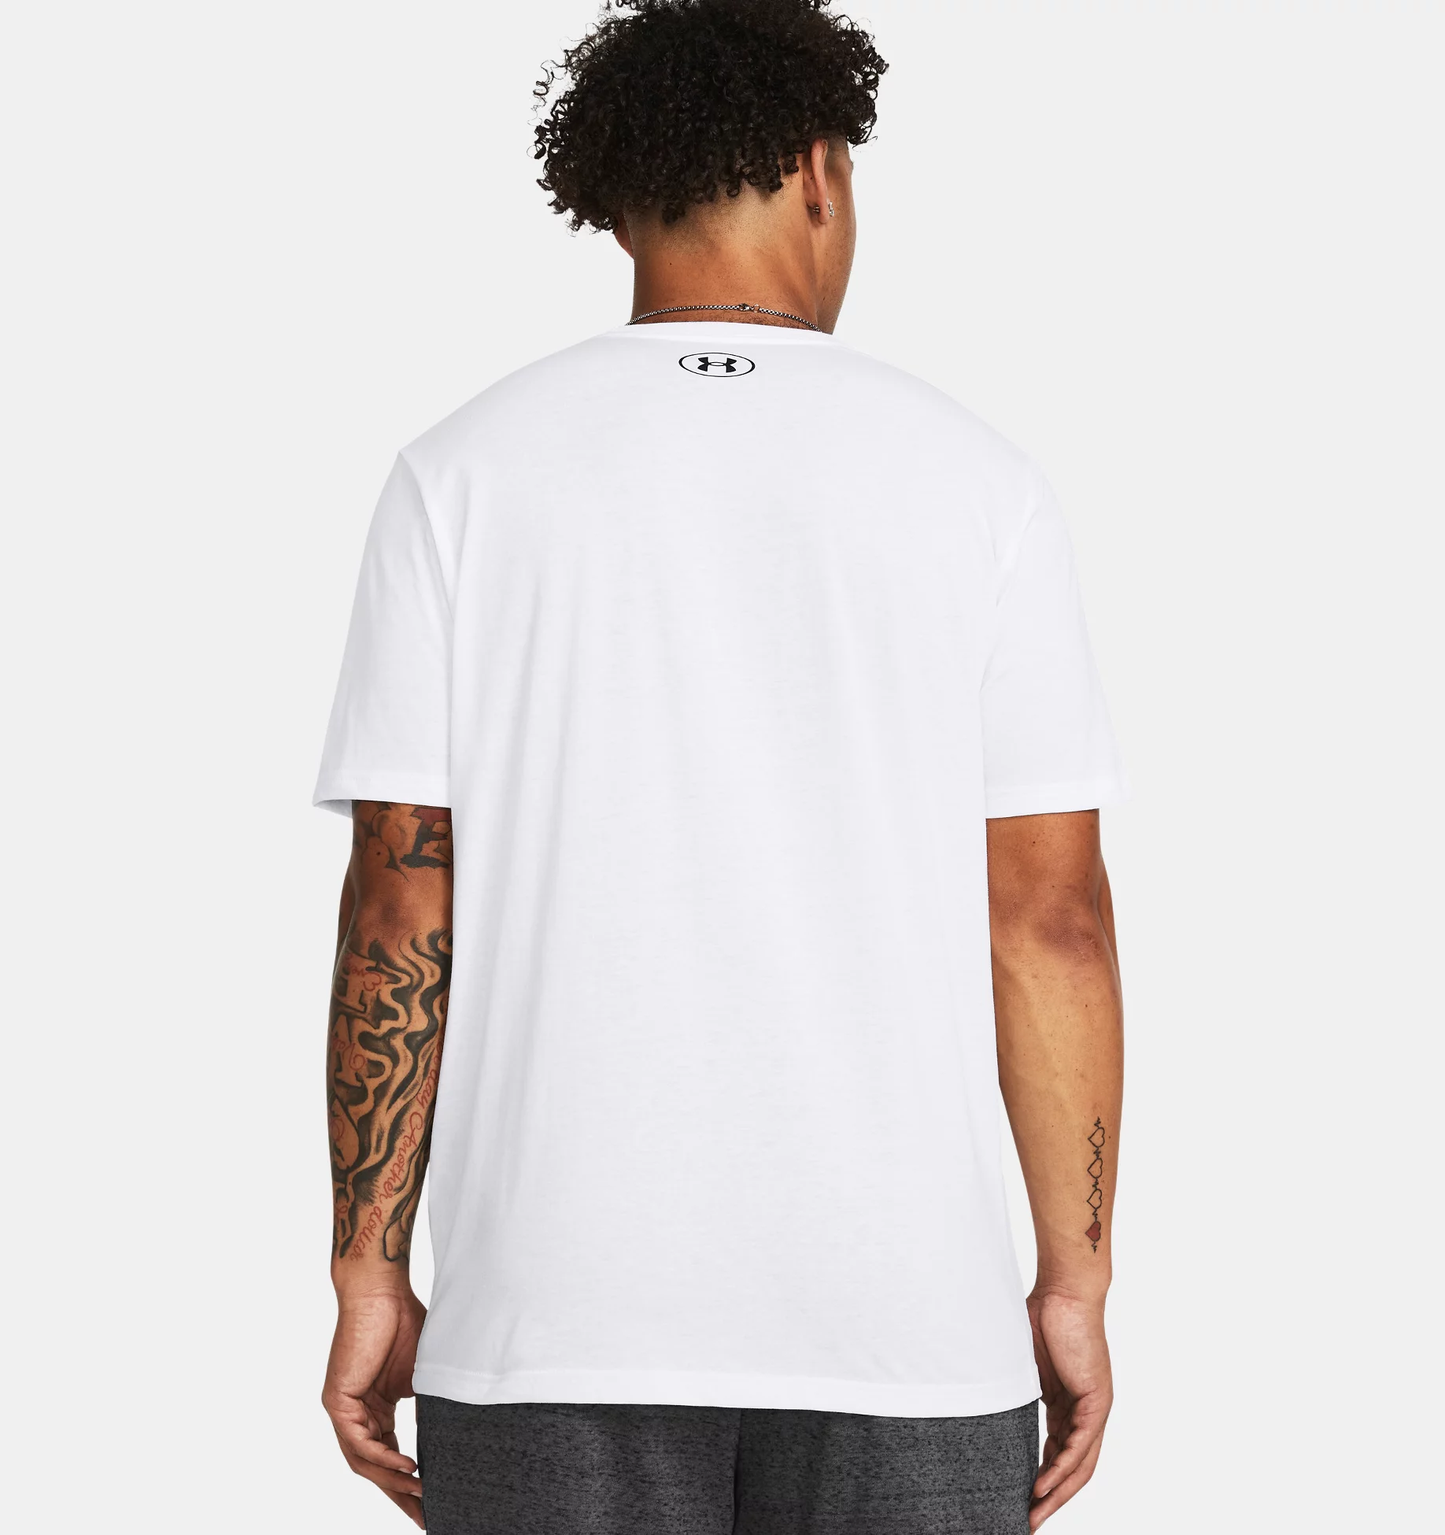 UNDER ARMOUR 1382911 UA SPORTSTYLE LOGO UPDATE S/S TEE-WHITE